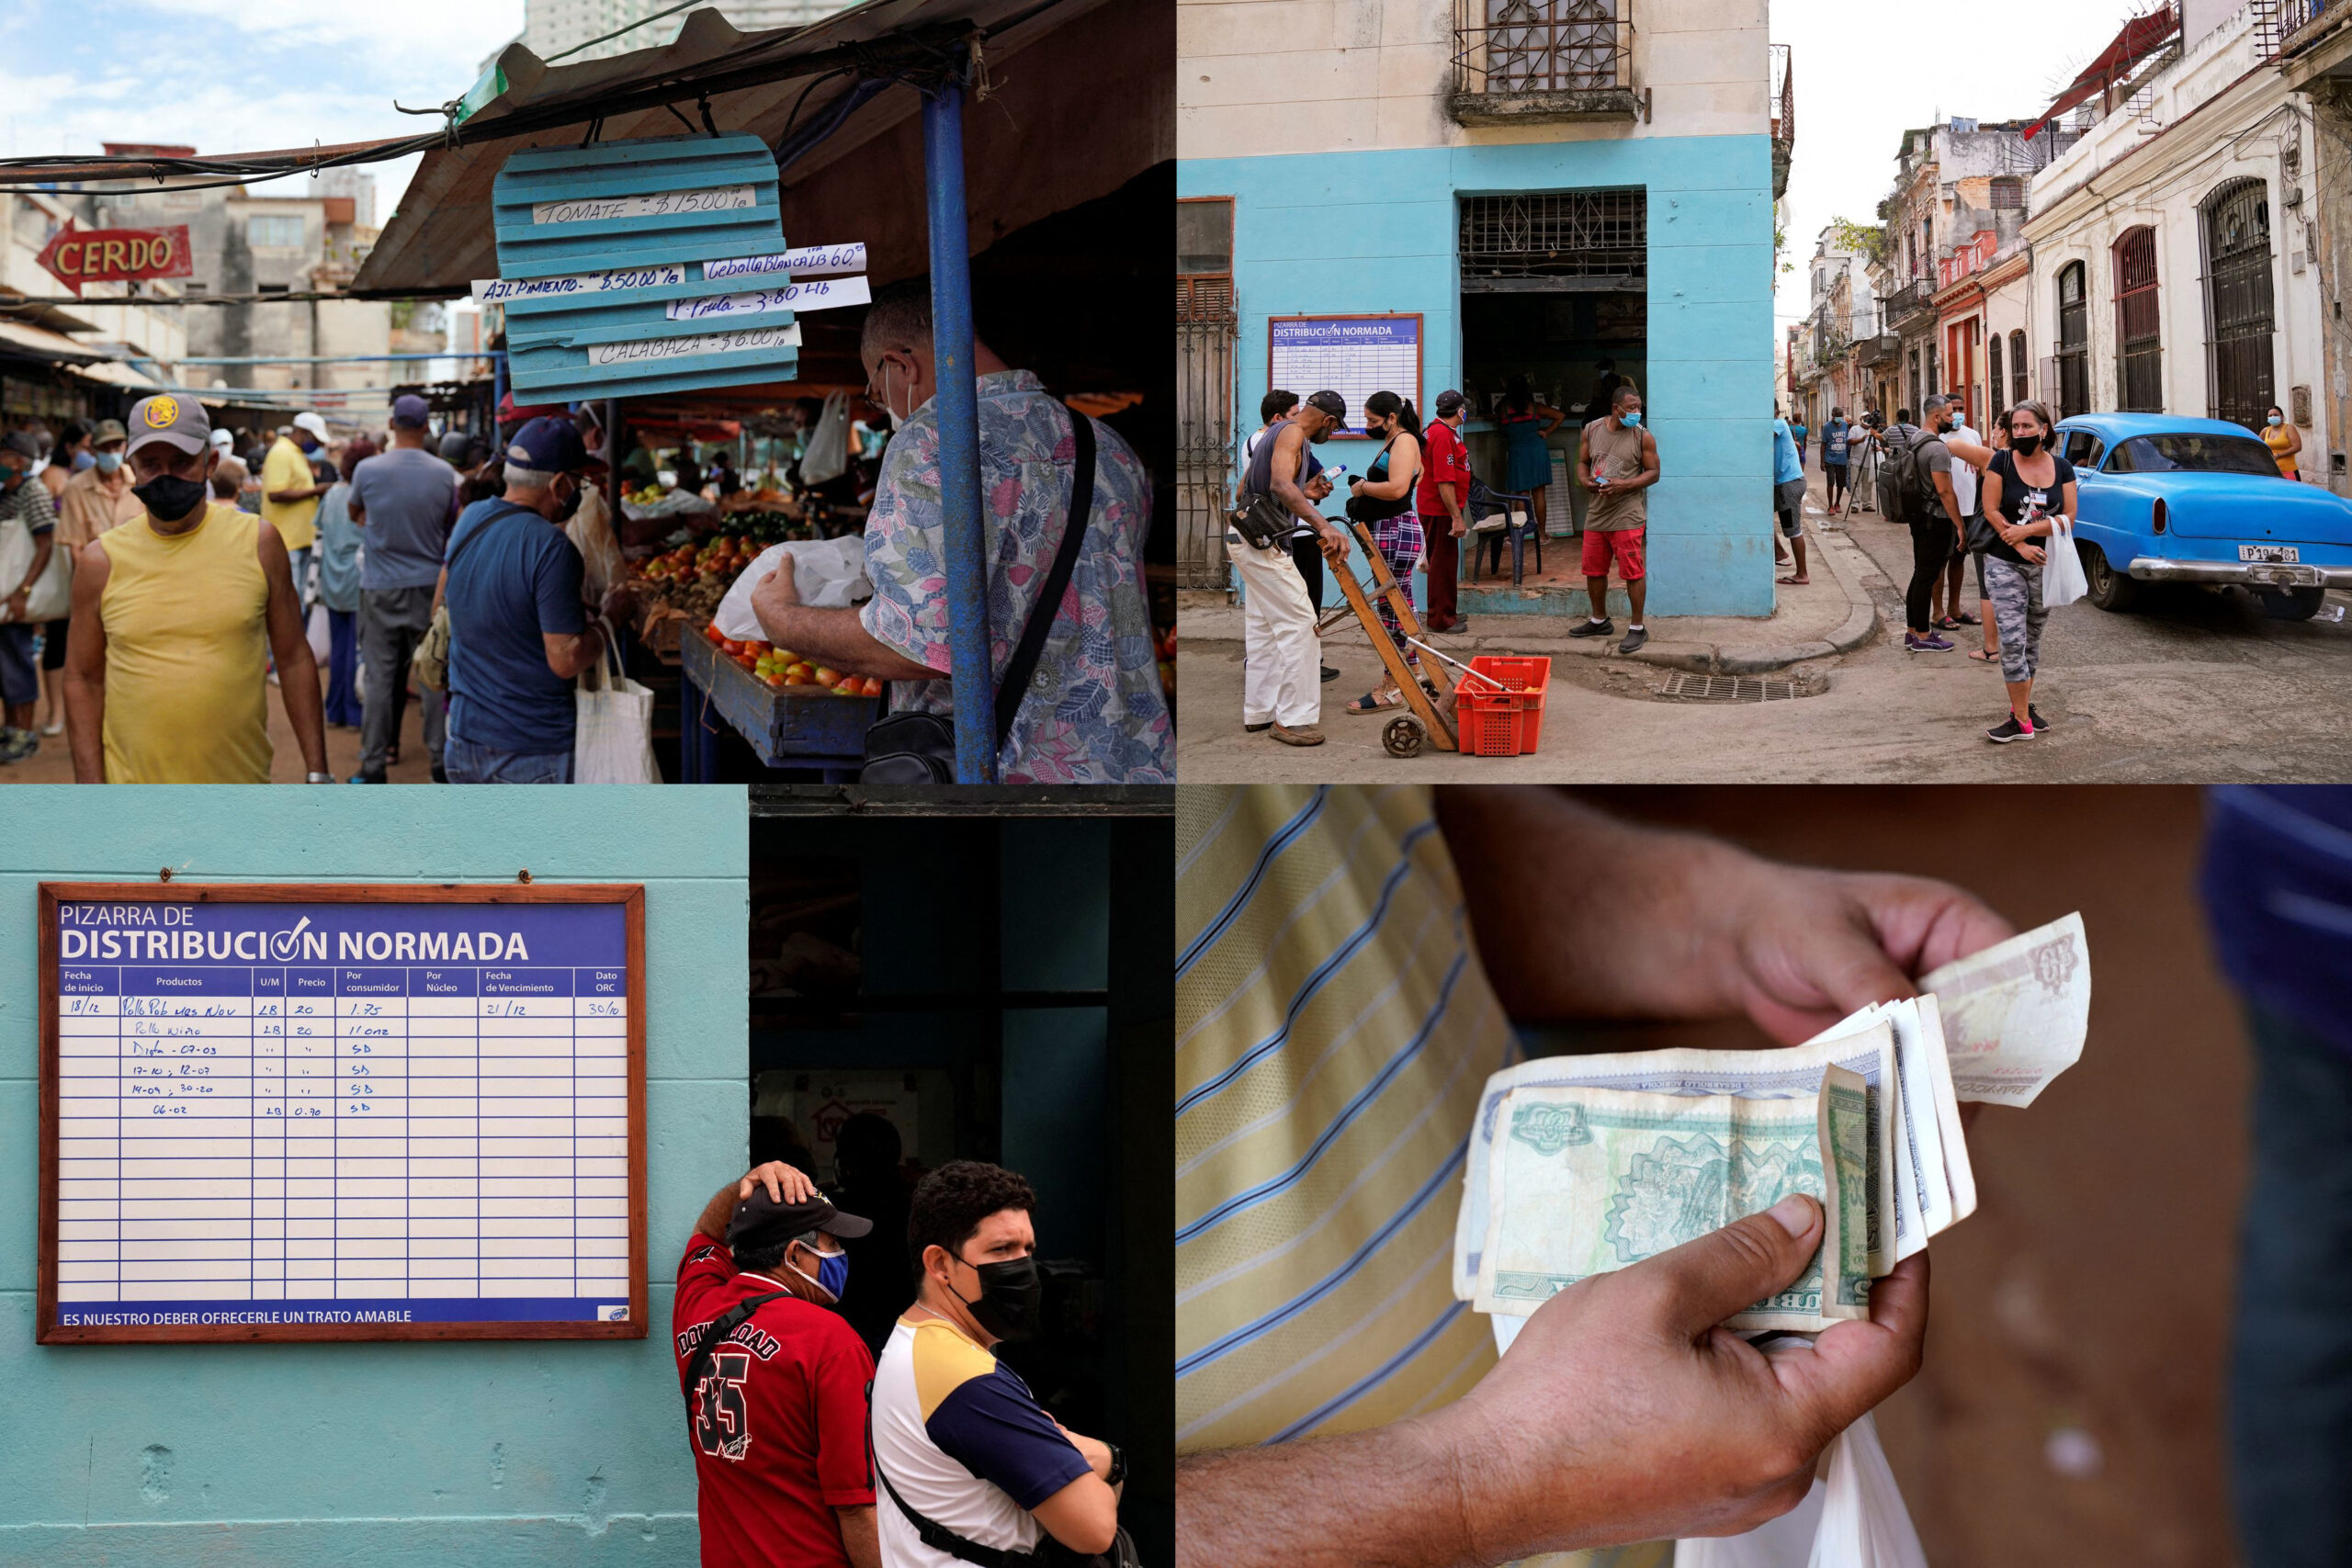 Communist Cuba Records Runaway Inflation Of Over 70%